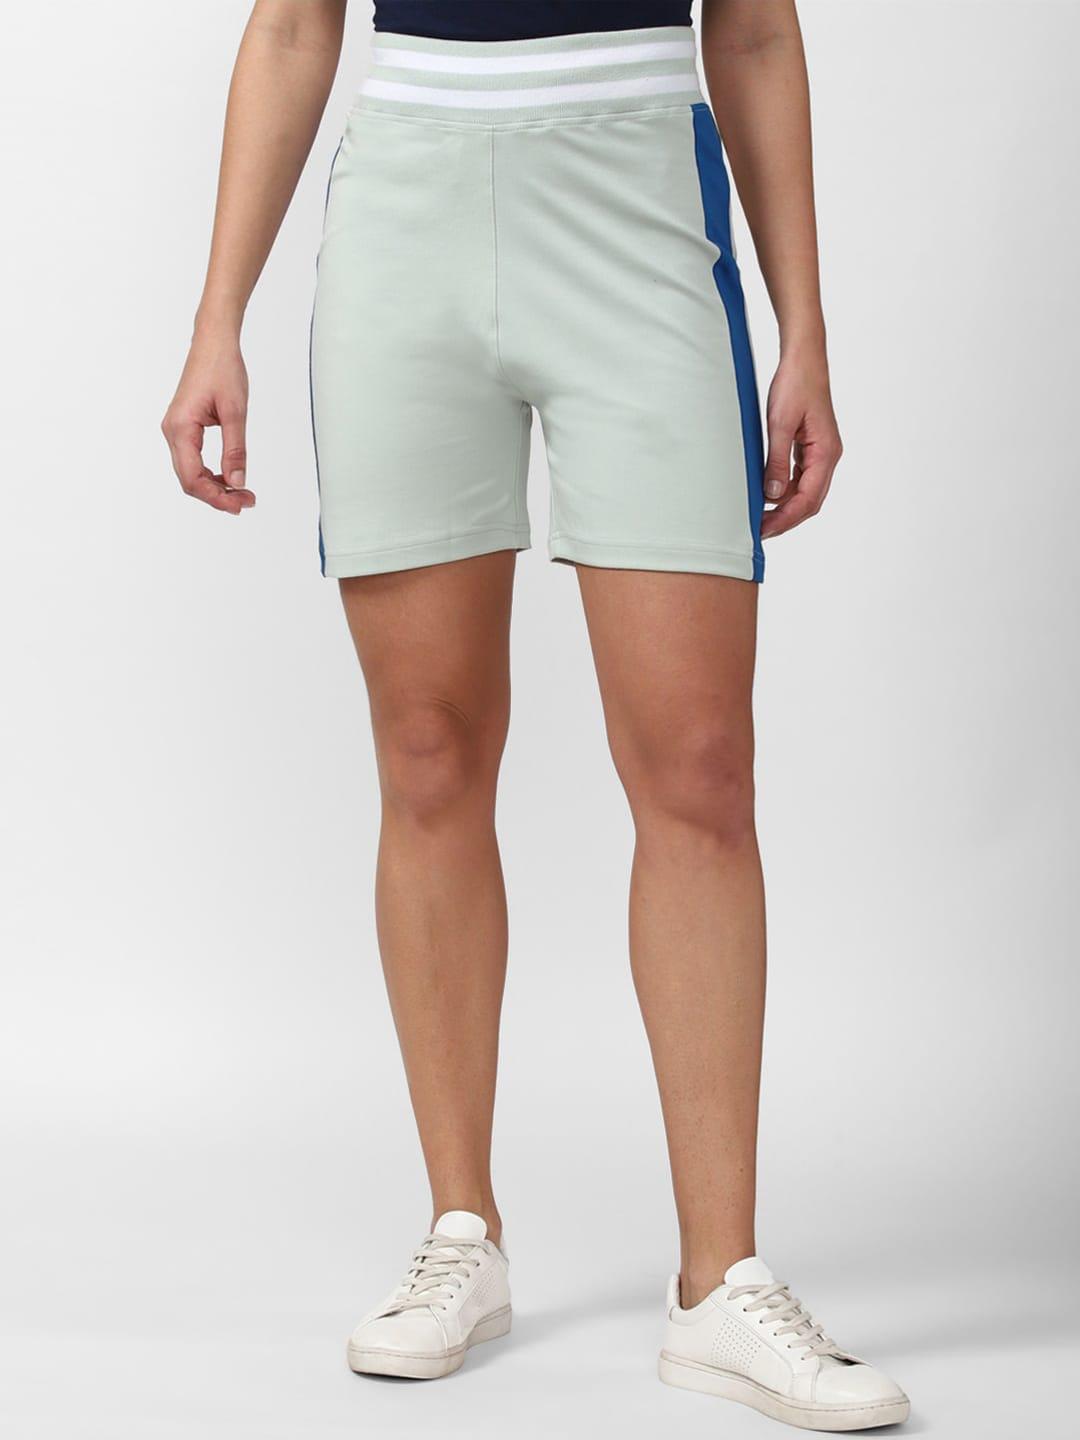 FOREVER 21 Women Solid Sports Shorts